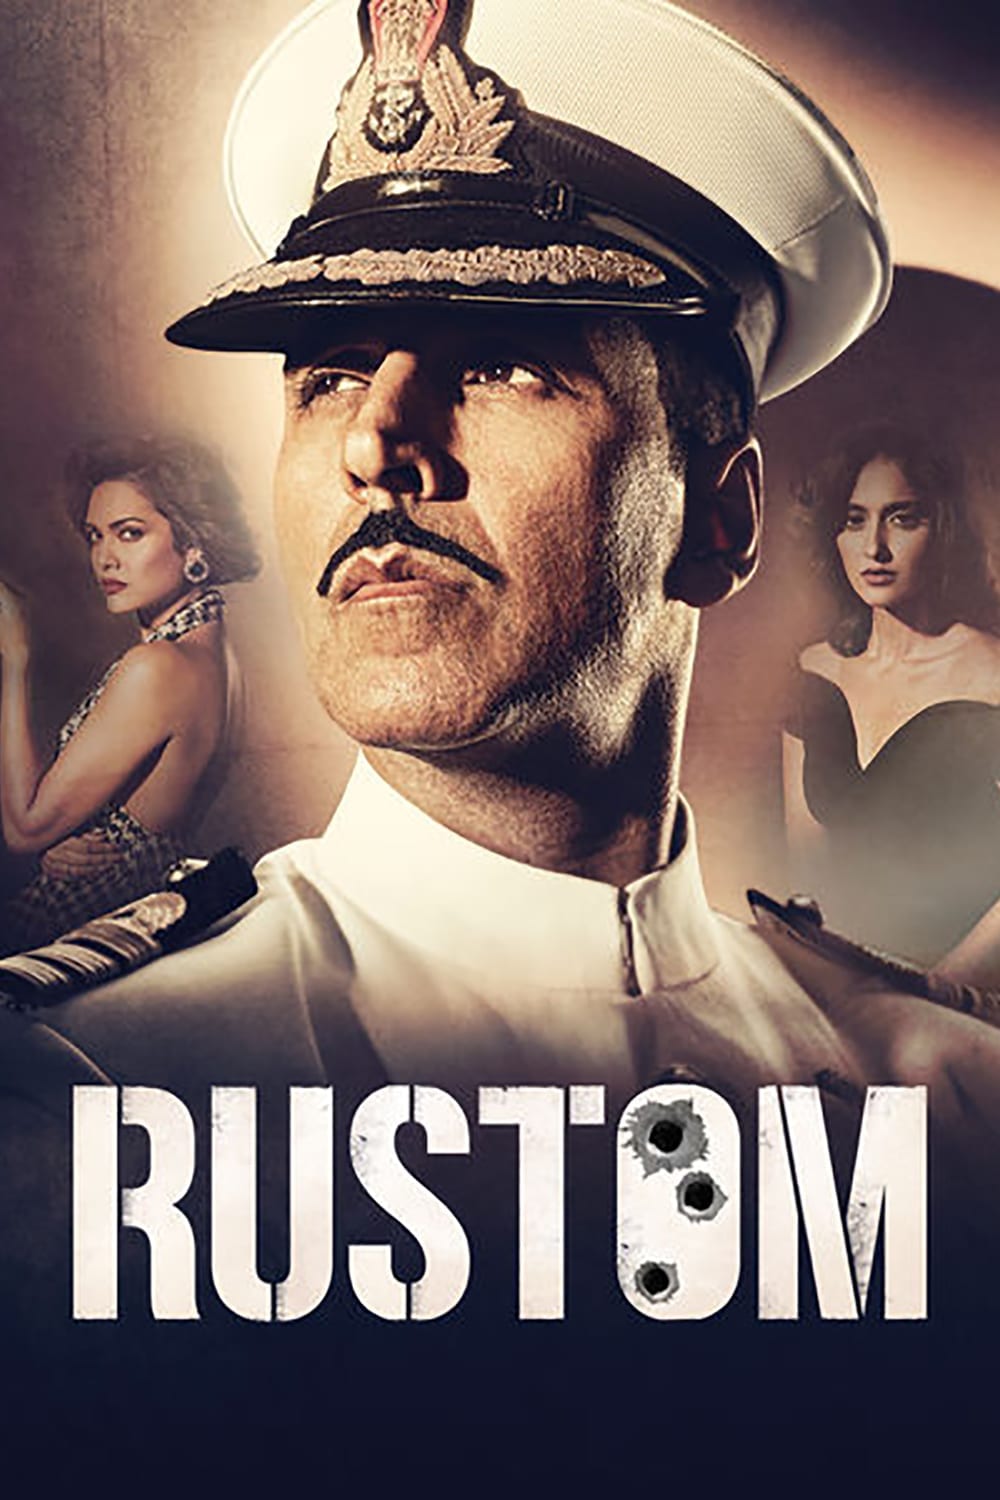 Poster for the movie "Rustom"